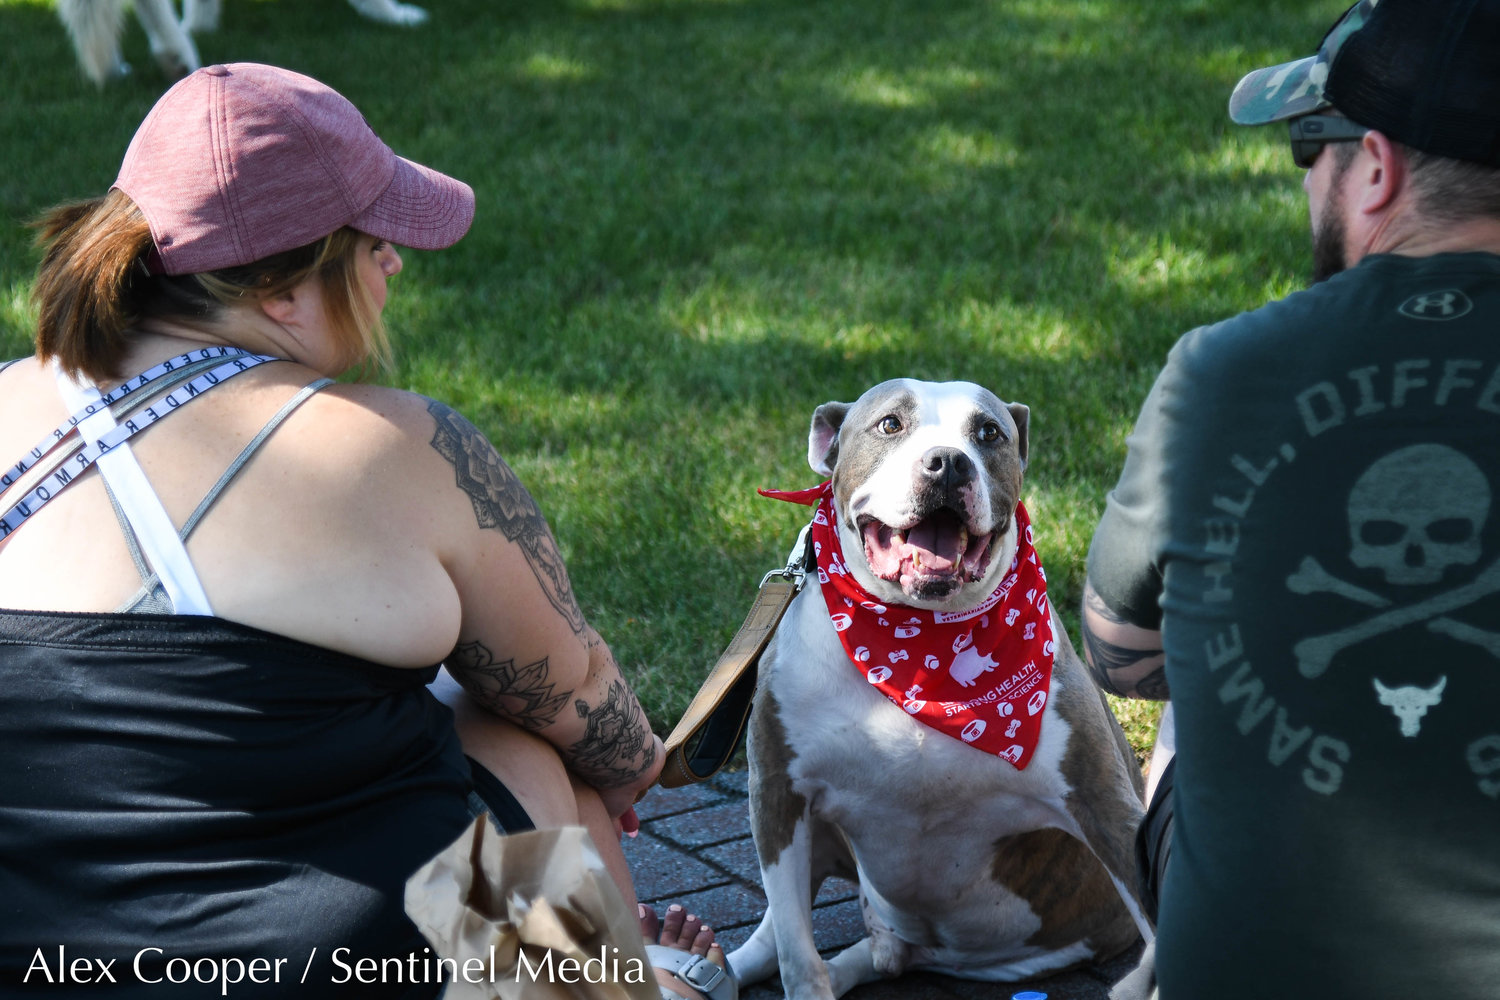 Dogs and their owners participate in a dog show hosted by the Herkimer County Humane Society on Saturday at Central Plaza in Ilion. The show was part of a long list of events hosted during Ilion Days 2022 from July 16-24.